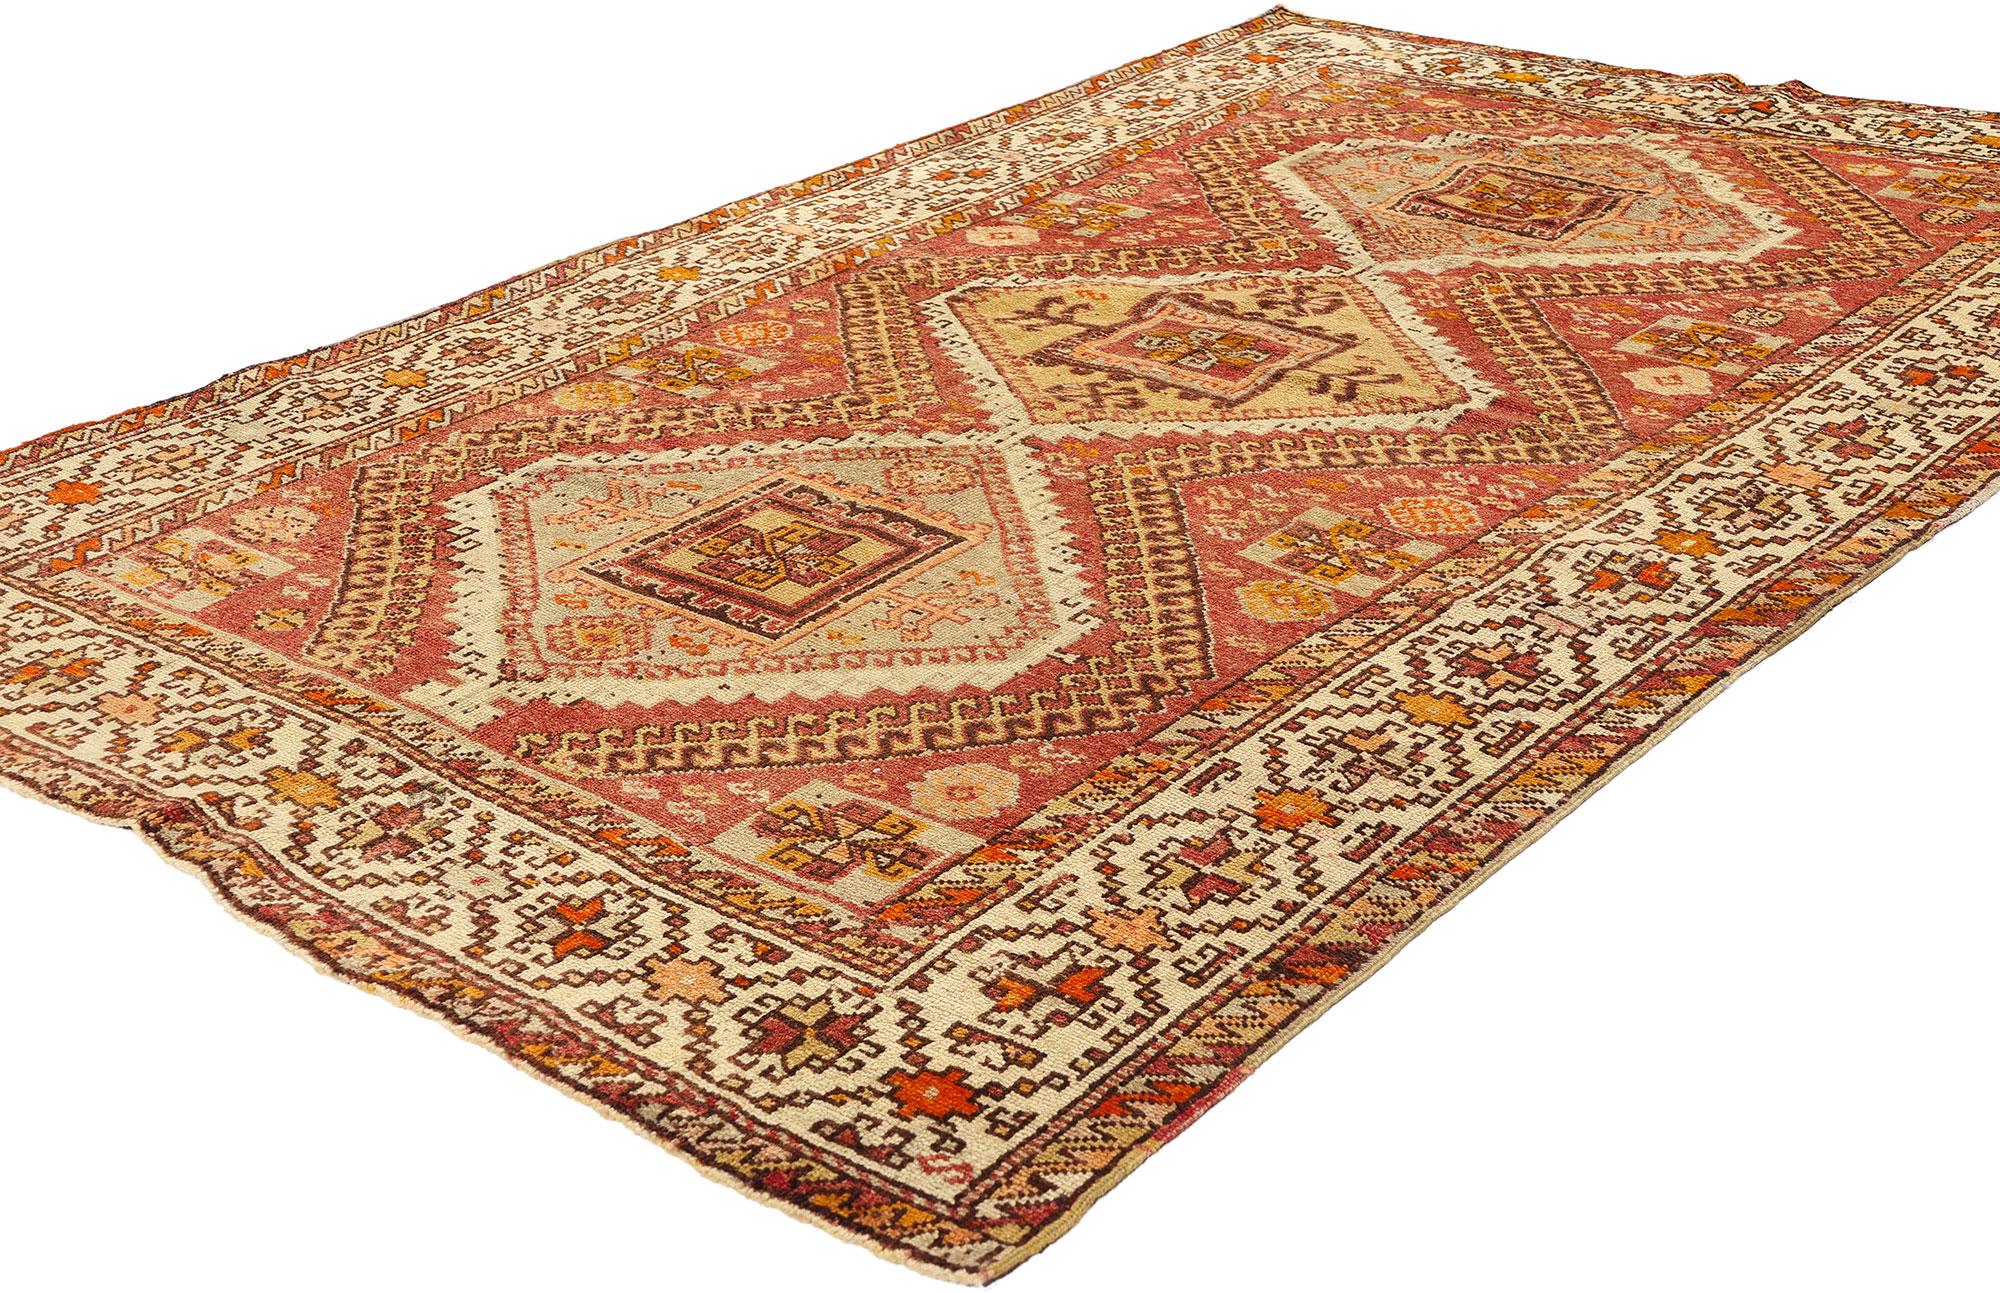 52107 Vintage Red Turkish Oushak Rug, 04'04 x 07'00. Turkish tribal Oushak rugs, adorned with captivating latch hook lozenge medallions, originate from the storied rug-making heart of Oushak in western Turkey. These vibrant treasures weave together